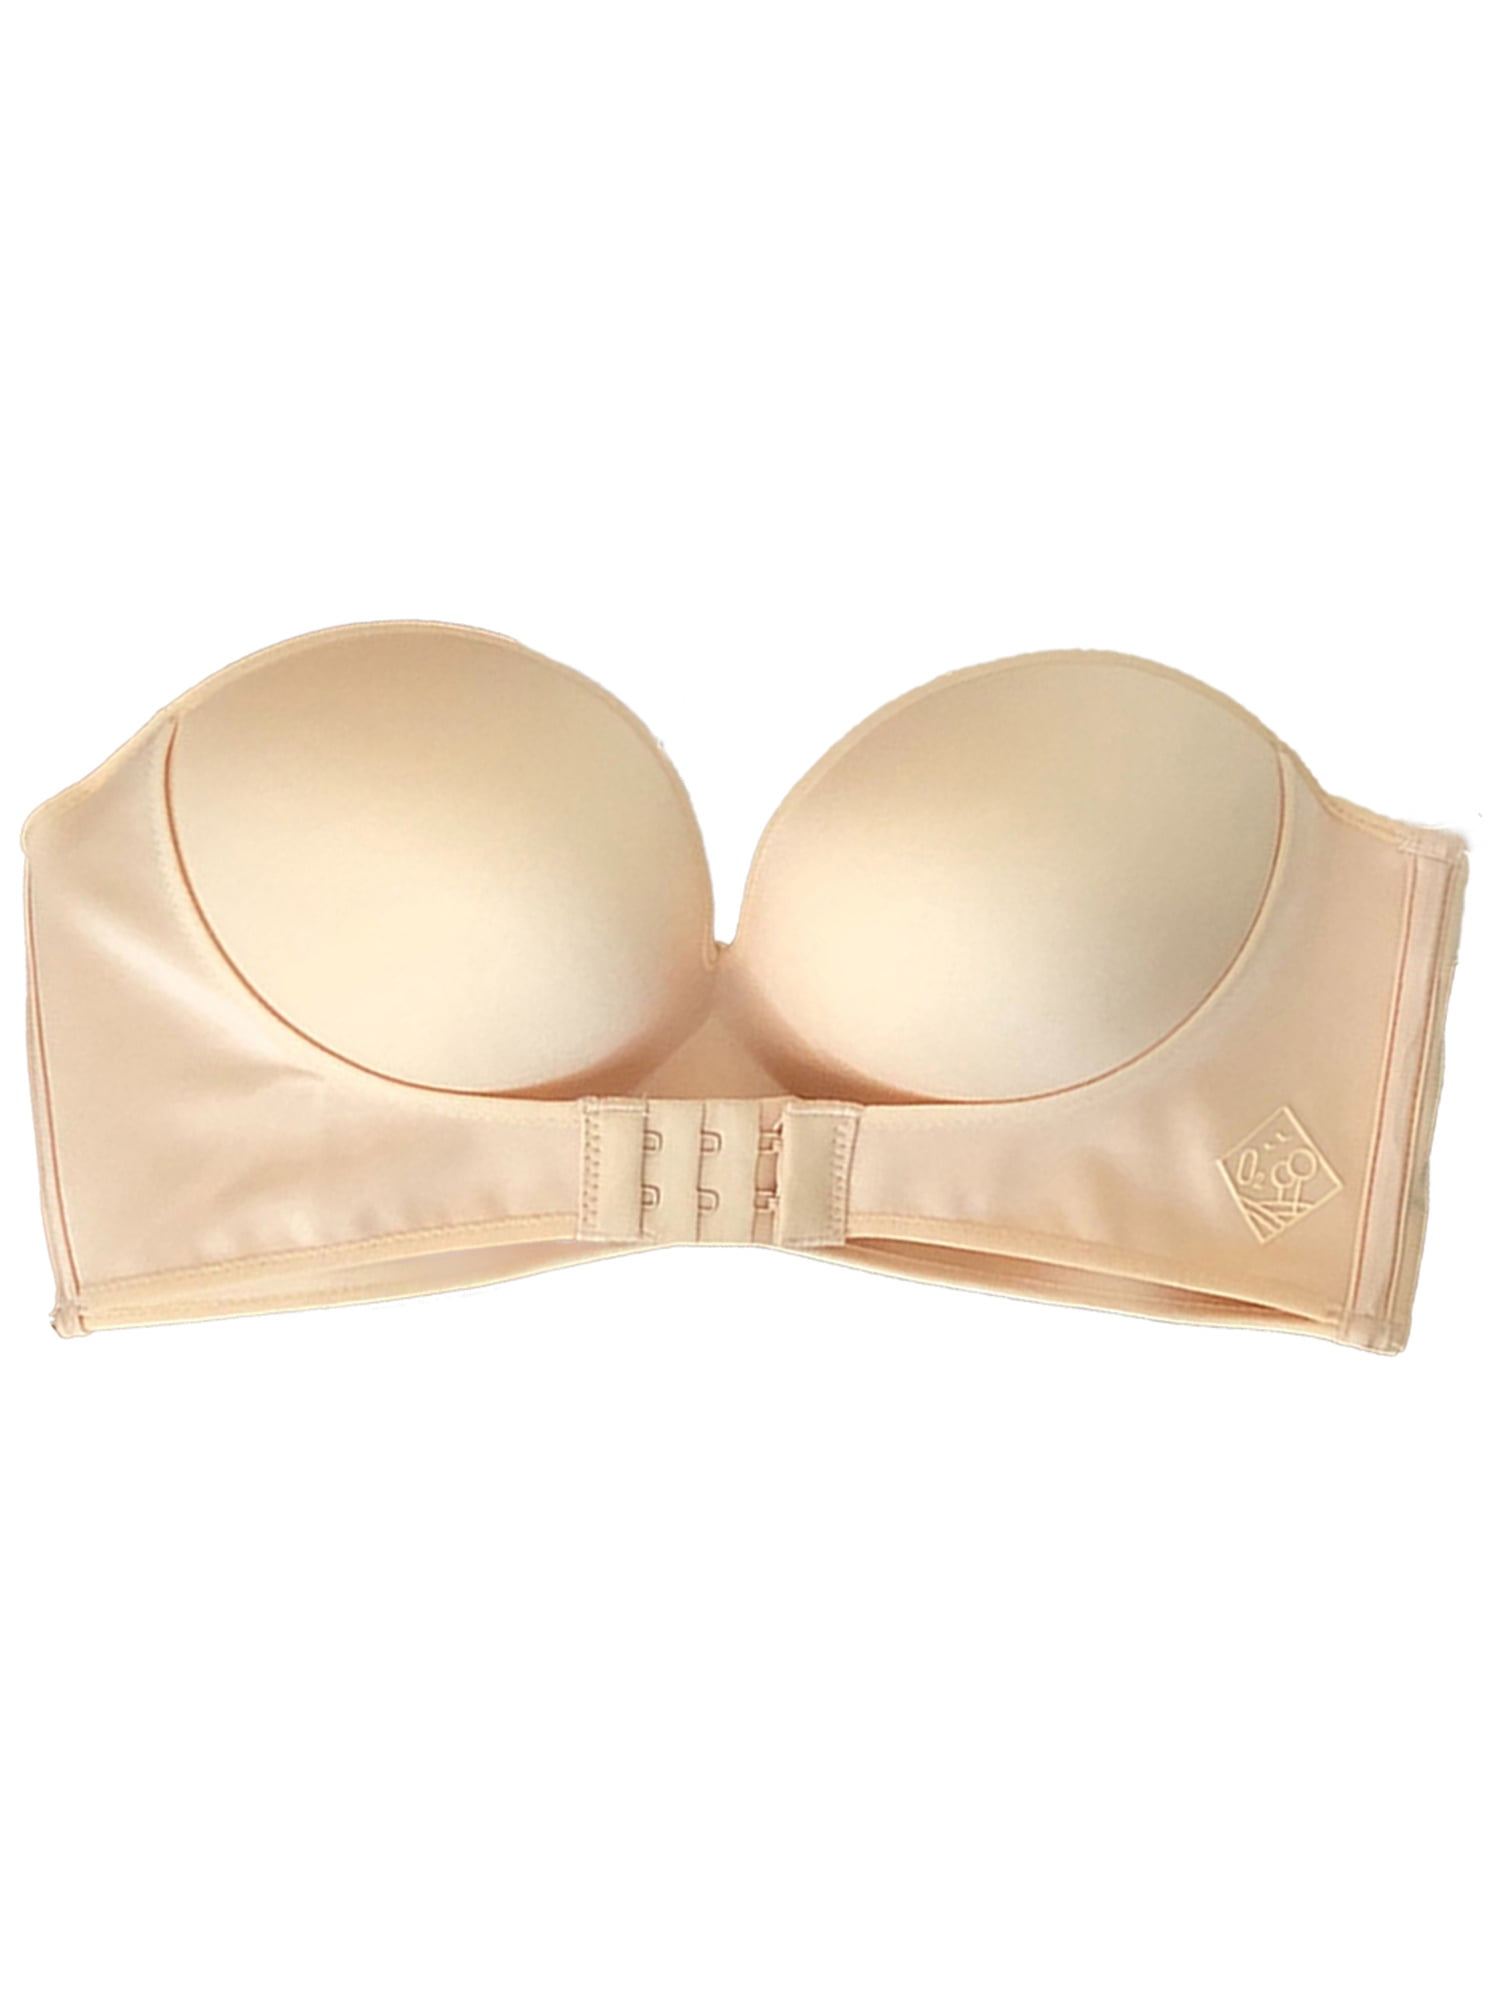 Wing Shape Front Buckle Bra Self-Adhesive Invisible Strapless Padded Breast Lift Strapless Front Buckle Lift Bra